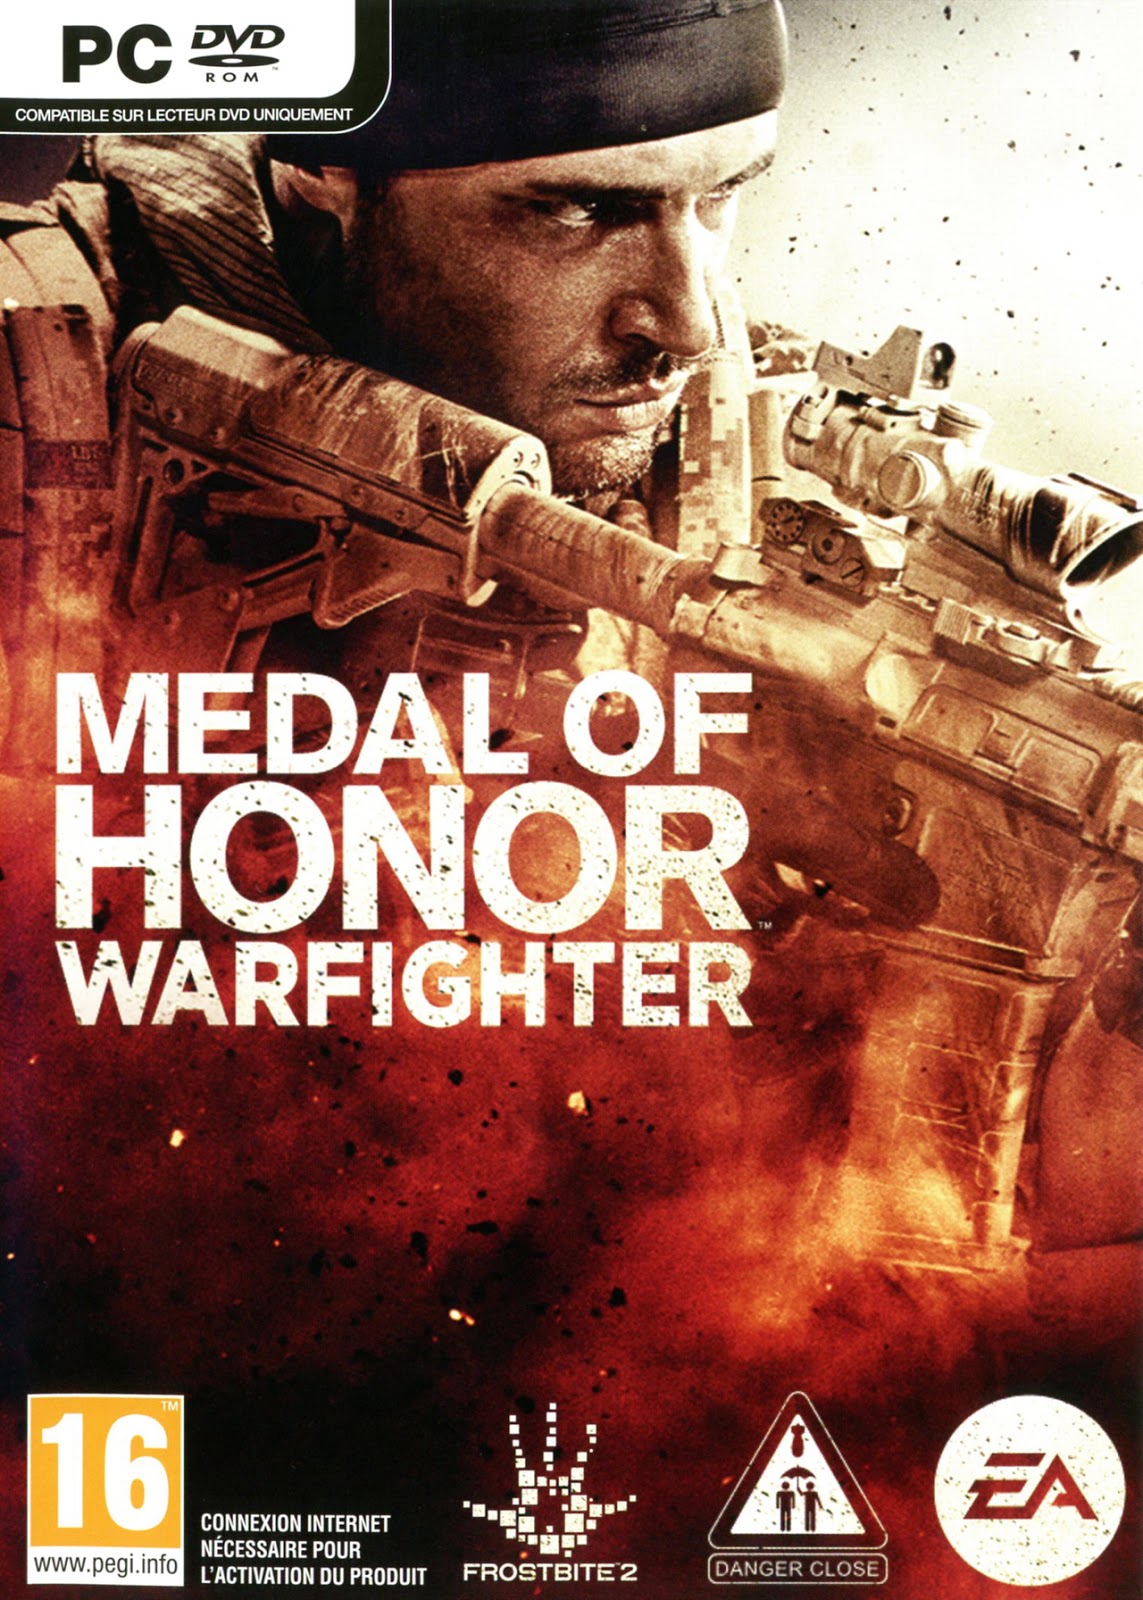 medal of honor warfighter pc download torrent